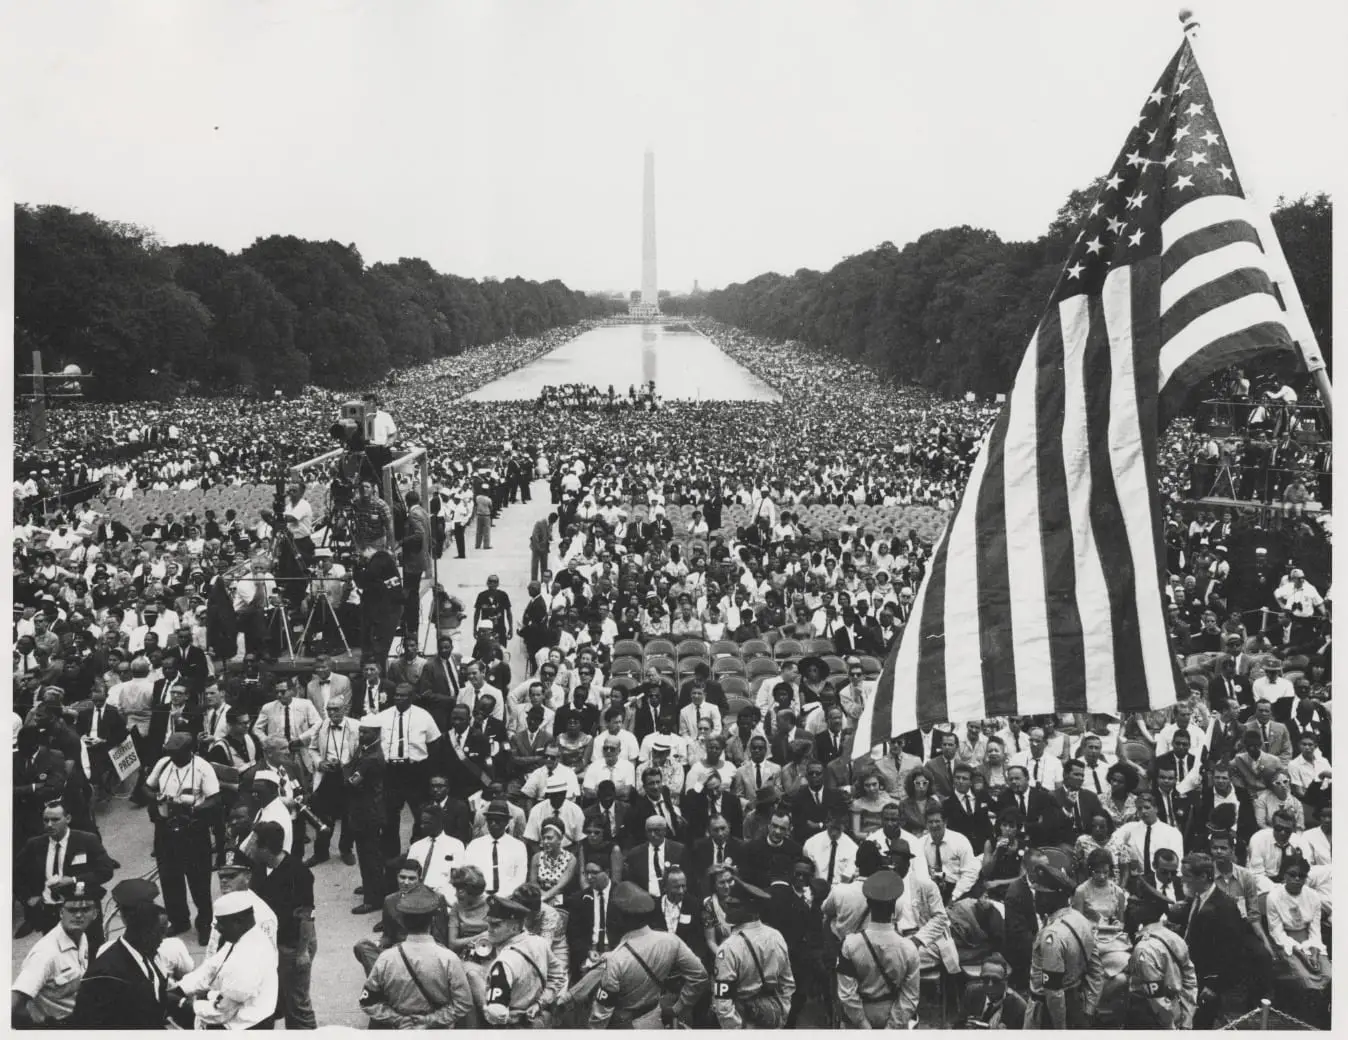 March on Washington for Jobs and Freedom (August 28th, 1963)